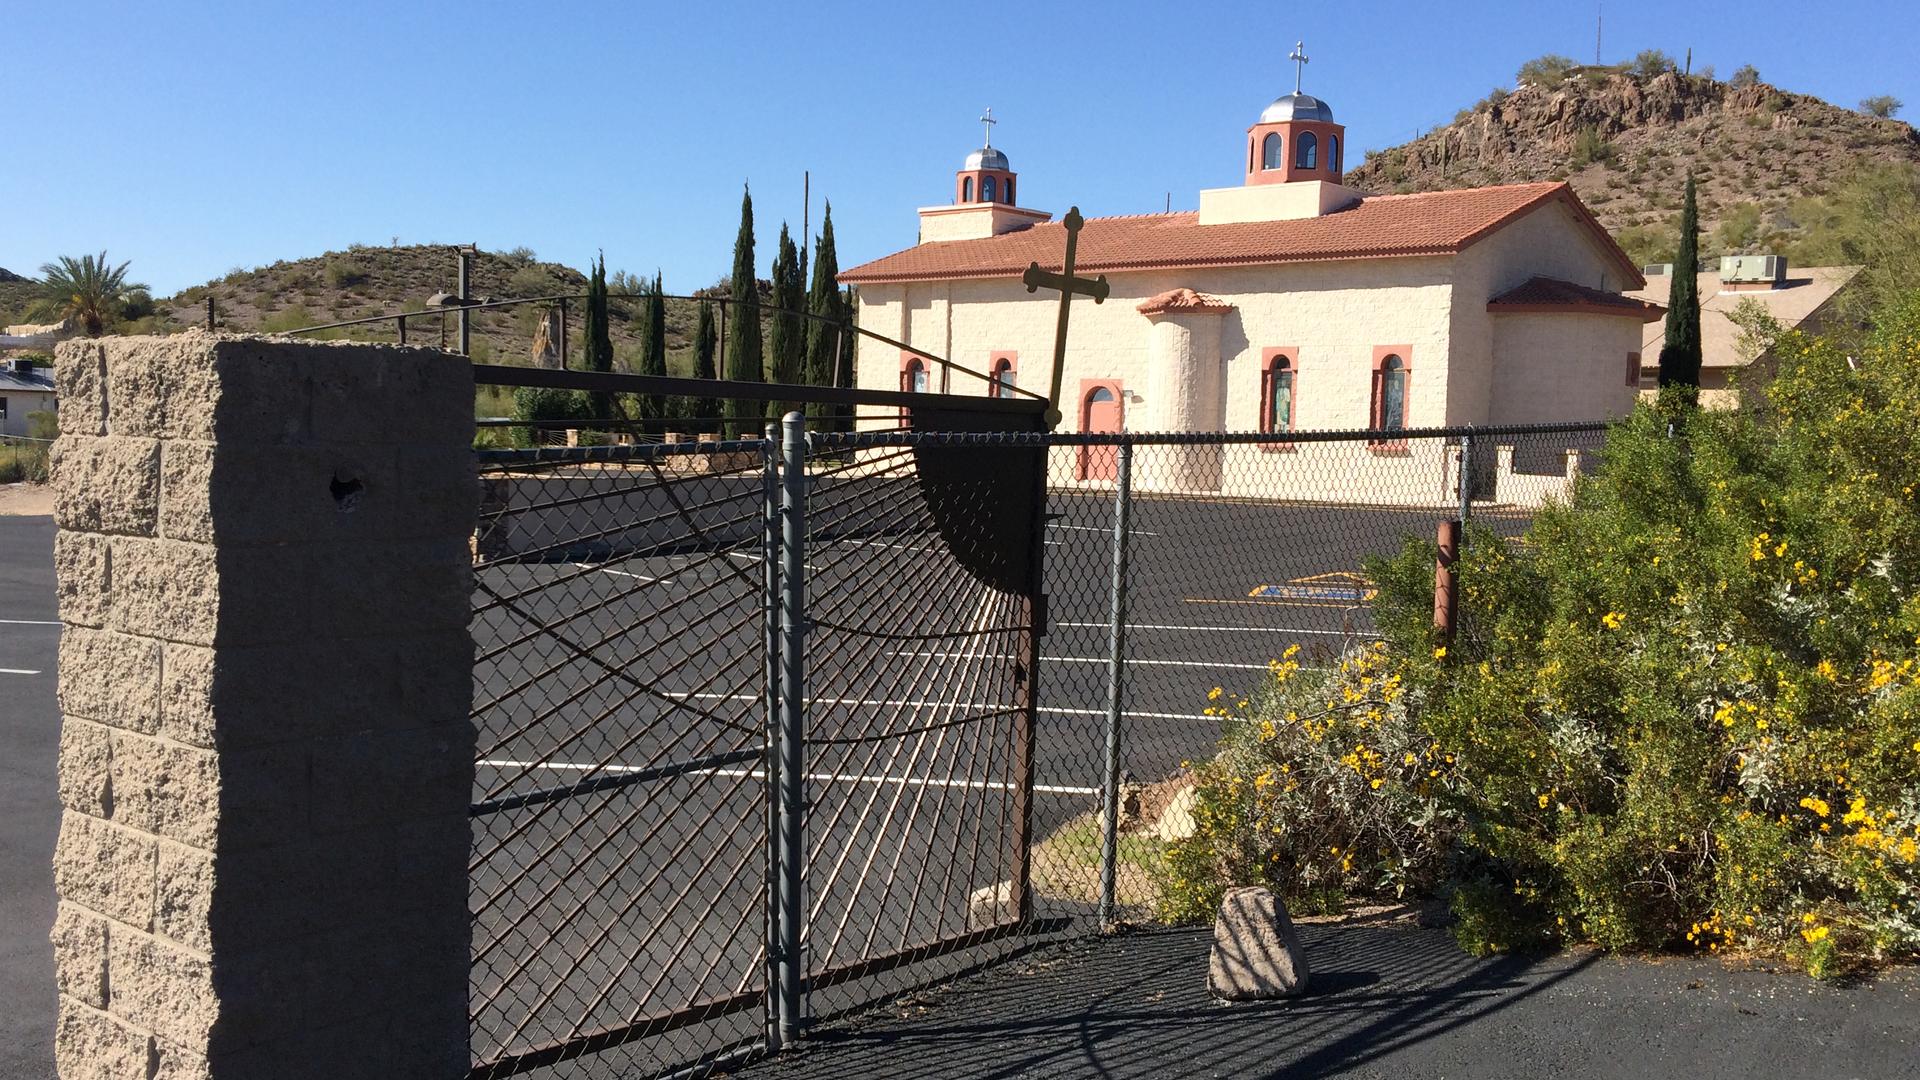 The gate at the St. Nicholas Serbian Orthodox Church in Phoenix was vandalized this past Christmas with graffiti depicting symbols of a Croatian group that historically persecuted Serbs.